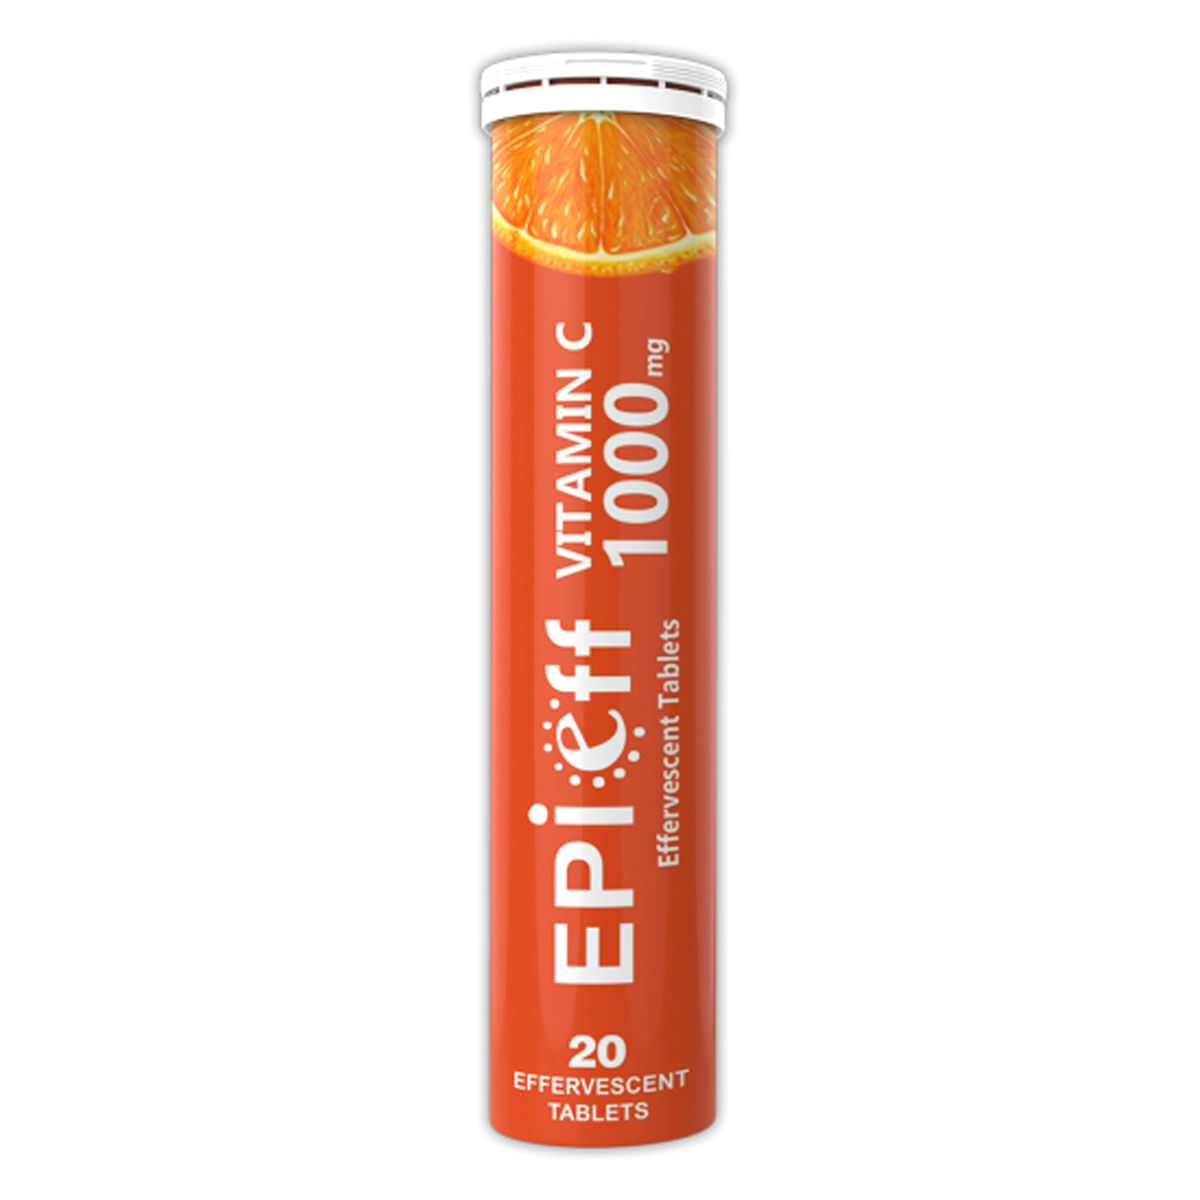 Epieff Vitamin C 1000mg Effervescent Tablet 20's, Pack of 1 TABLET